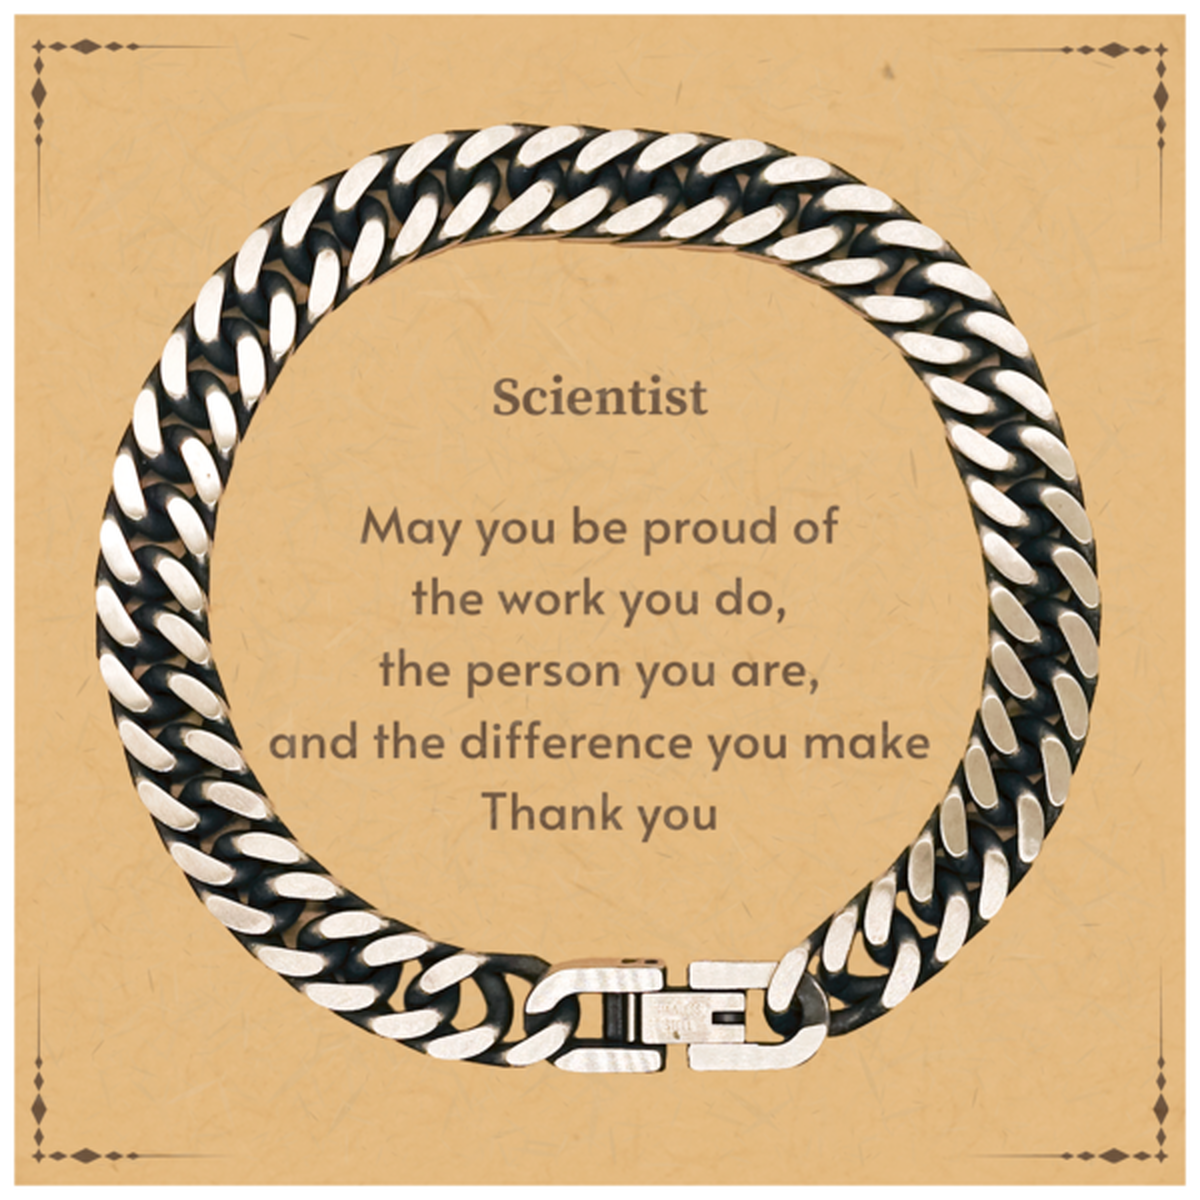 Heartwarming Cuban Link Chain Bracelet Retirement Coworkers Gifts for Scientist, Scientist May You be proud of the work you do, the person you are Gifts for Boss Men Women Friends